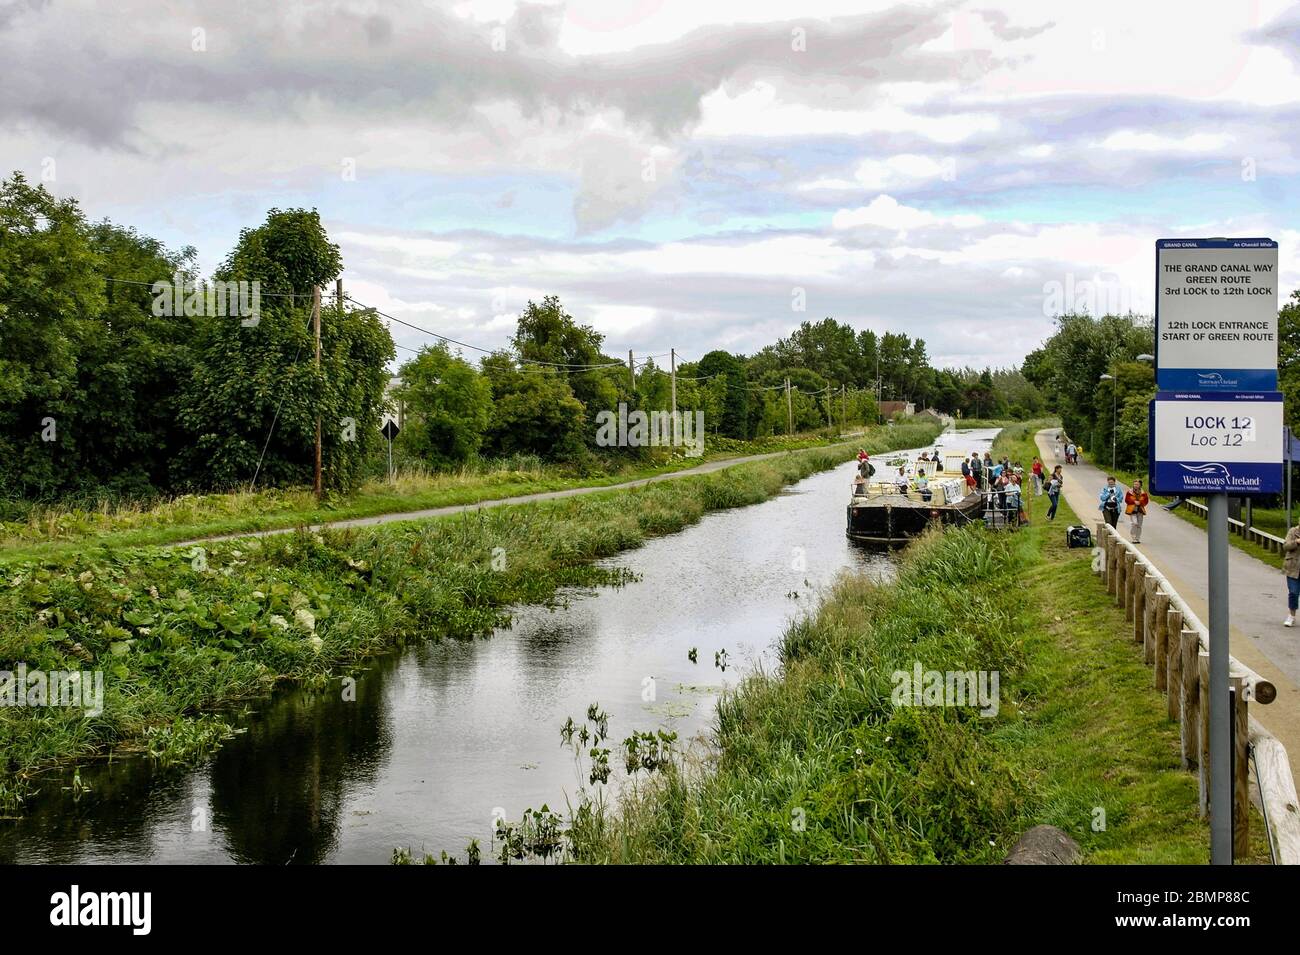 A barge moored in the Grand Canal near the 12th  Lock at Lucan, Dublin, Ireland, providing tours as part of Heritage Week. Stock Photo